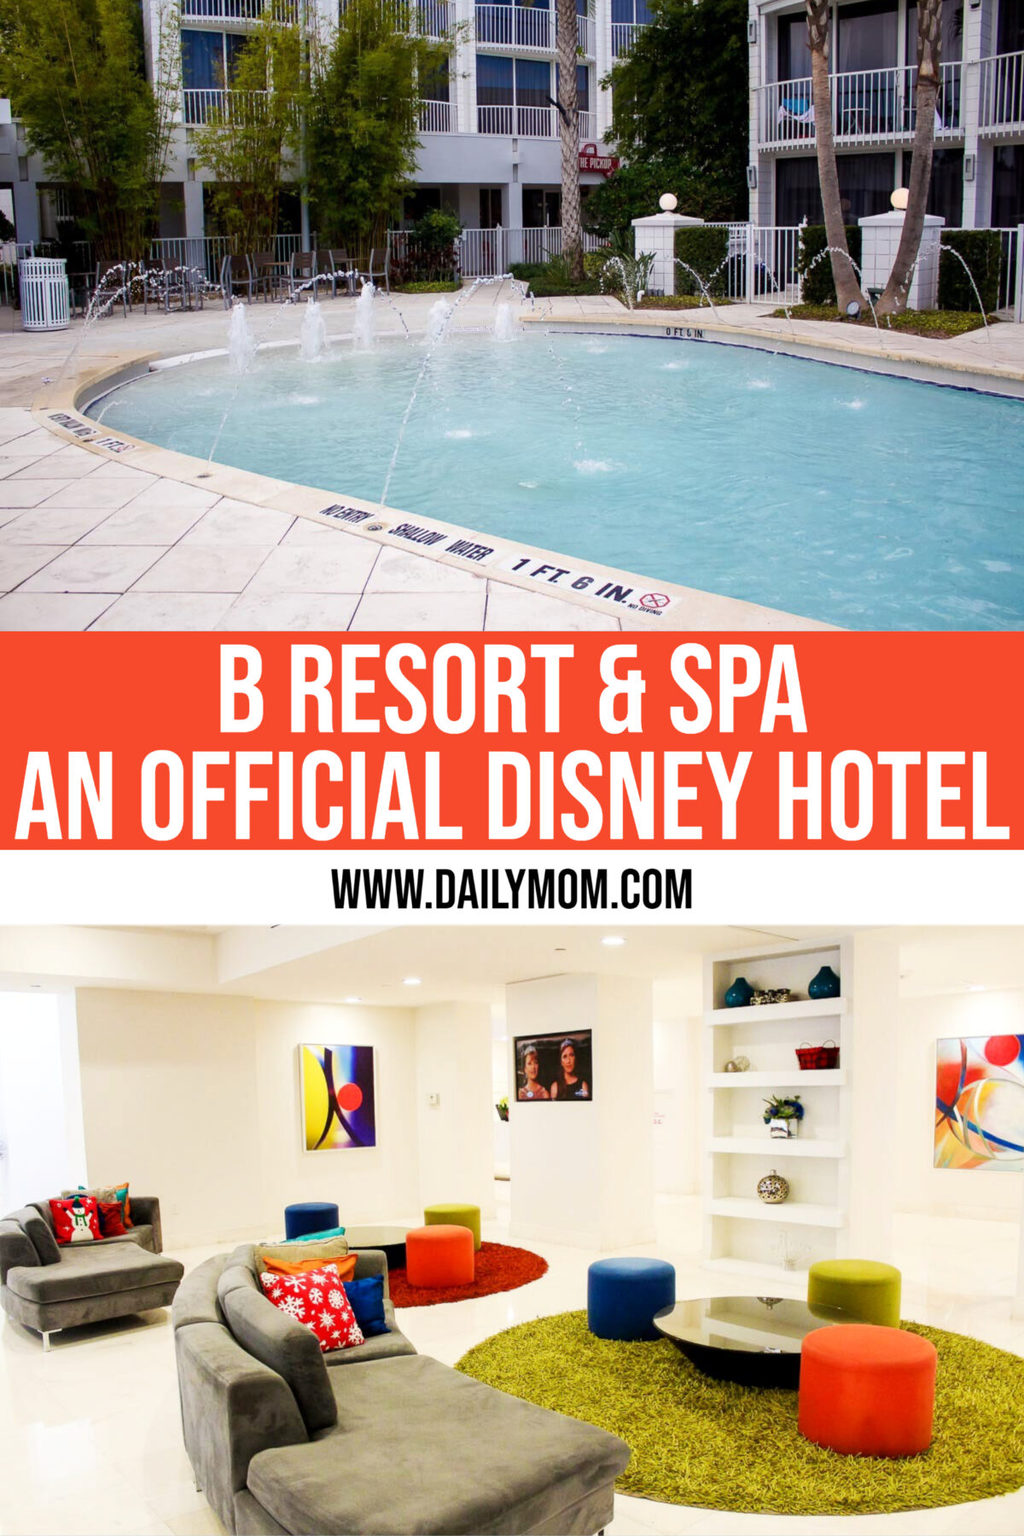 B Resort And Spa: A Family-friendly Resort Experience When Visiting The Disney Area